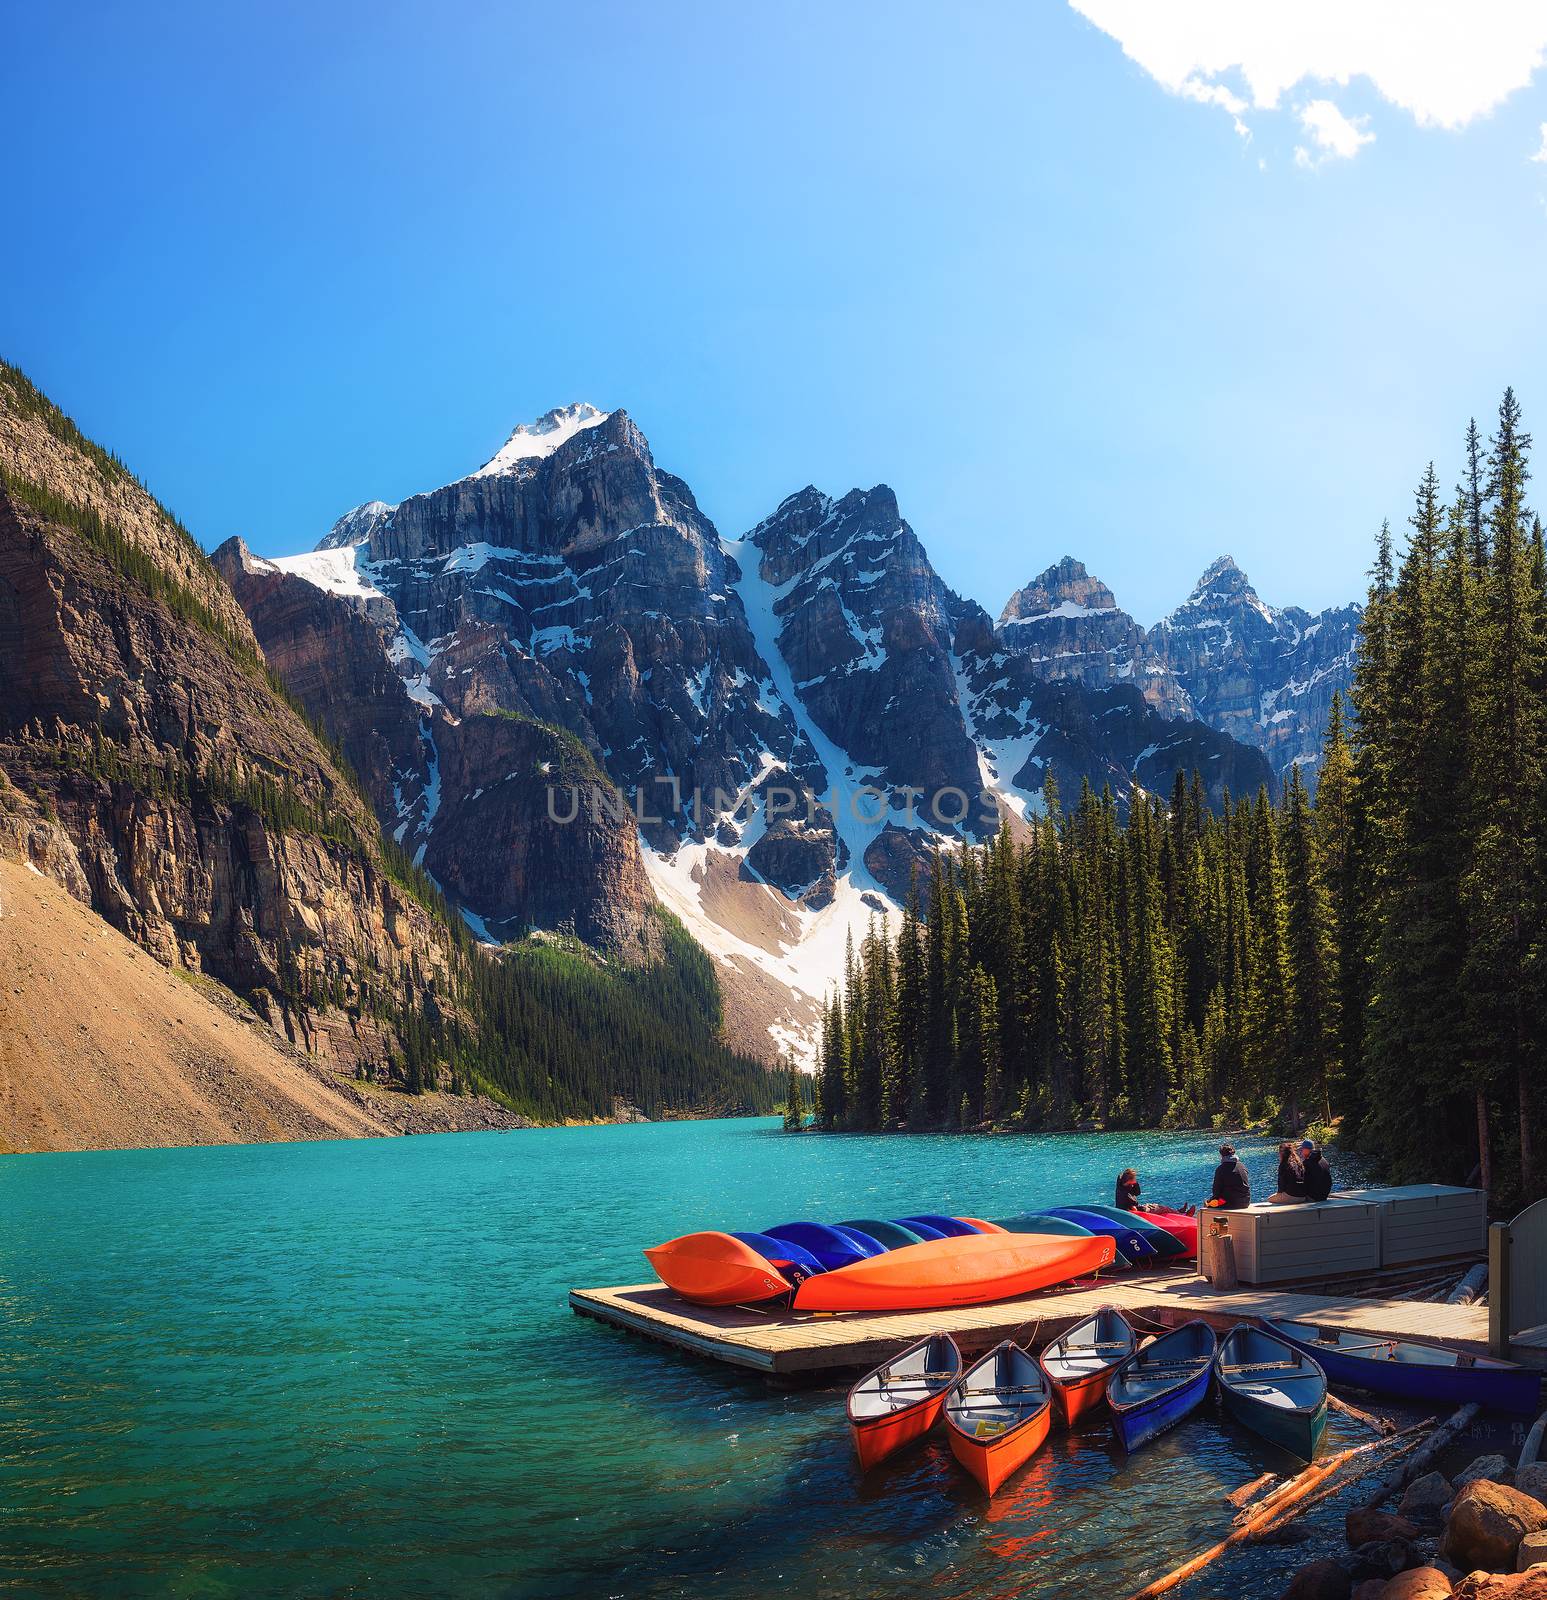 Canoes on a jetty at Moraine lake in Canada by nickfox